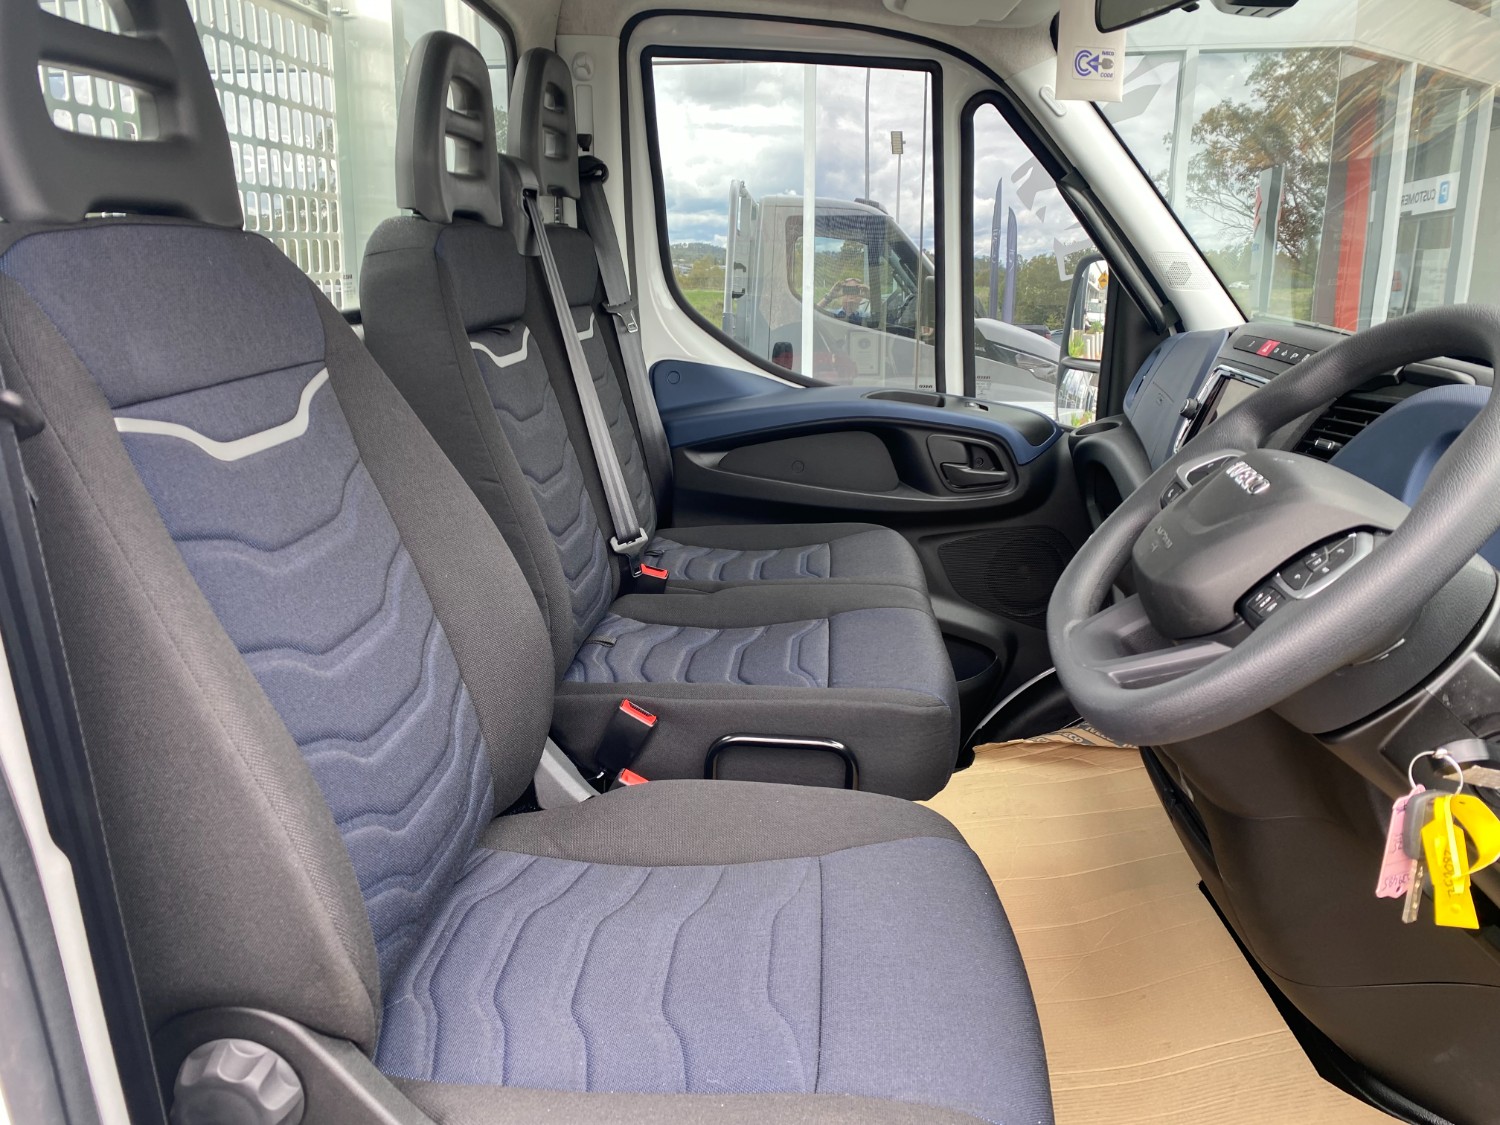 2022 Iveco Daily E6 Daily Cab Chassis Other Image 10